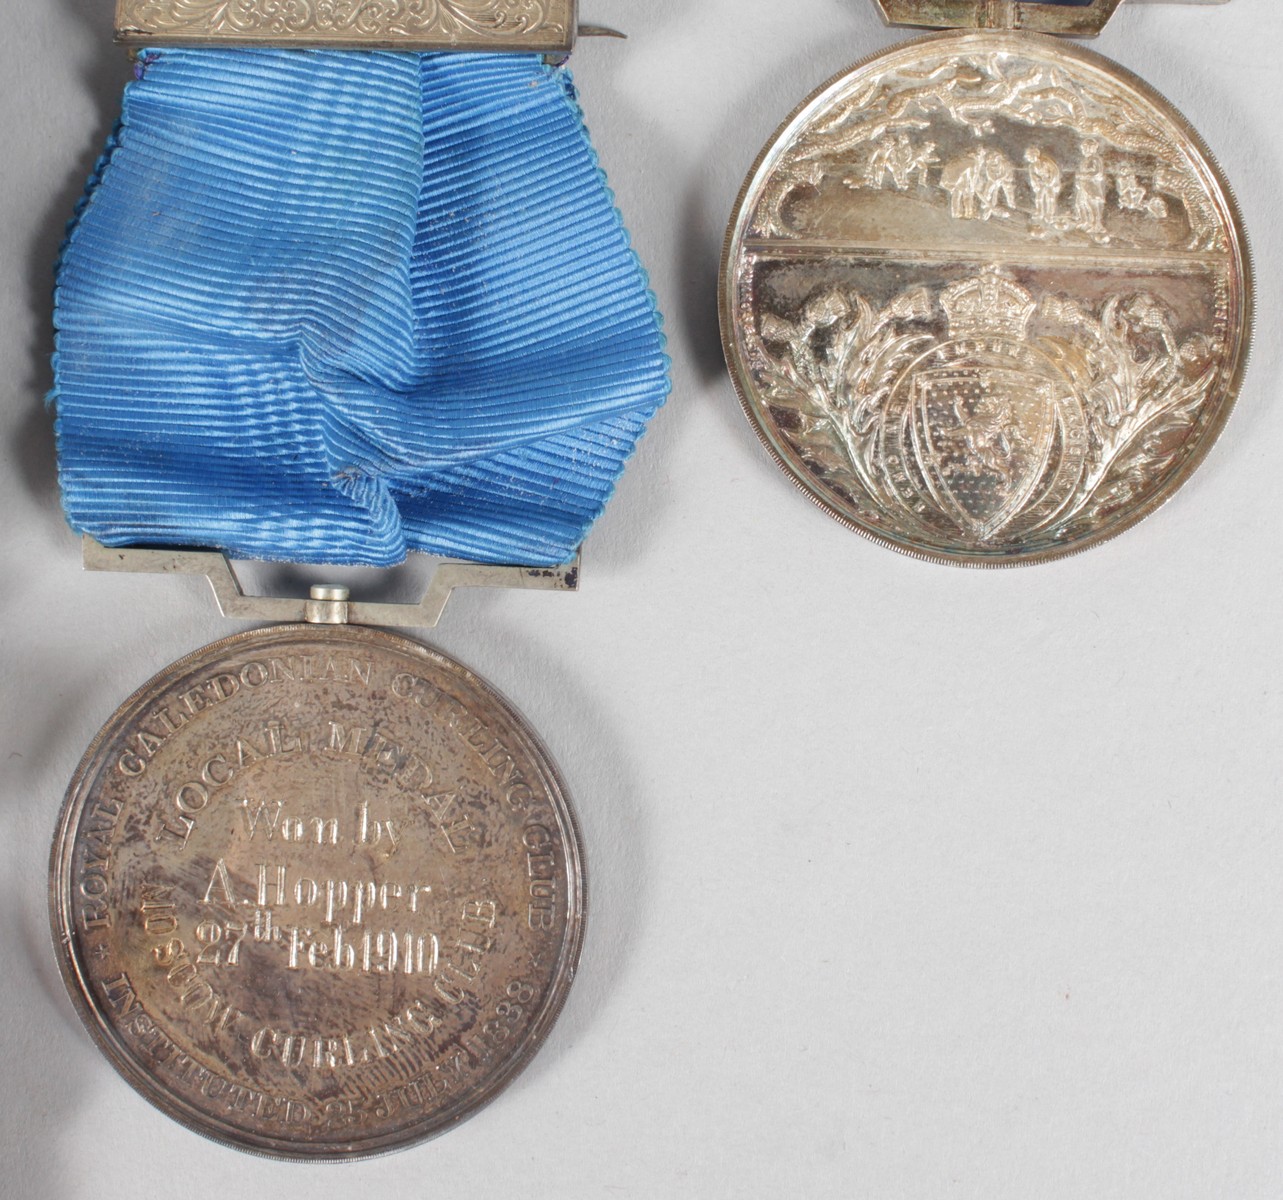 A COLLECTION OF MEDALS won by ALLAN HOOPER, MOSCOW CURLING CLUB, CIRCA. 1890-1910 (11), and five - Image 6 of 7